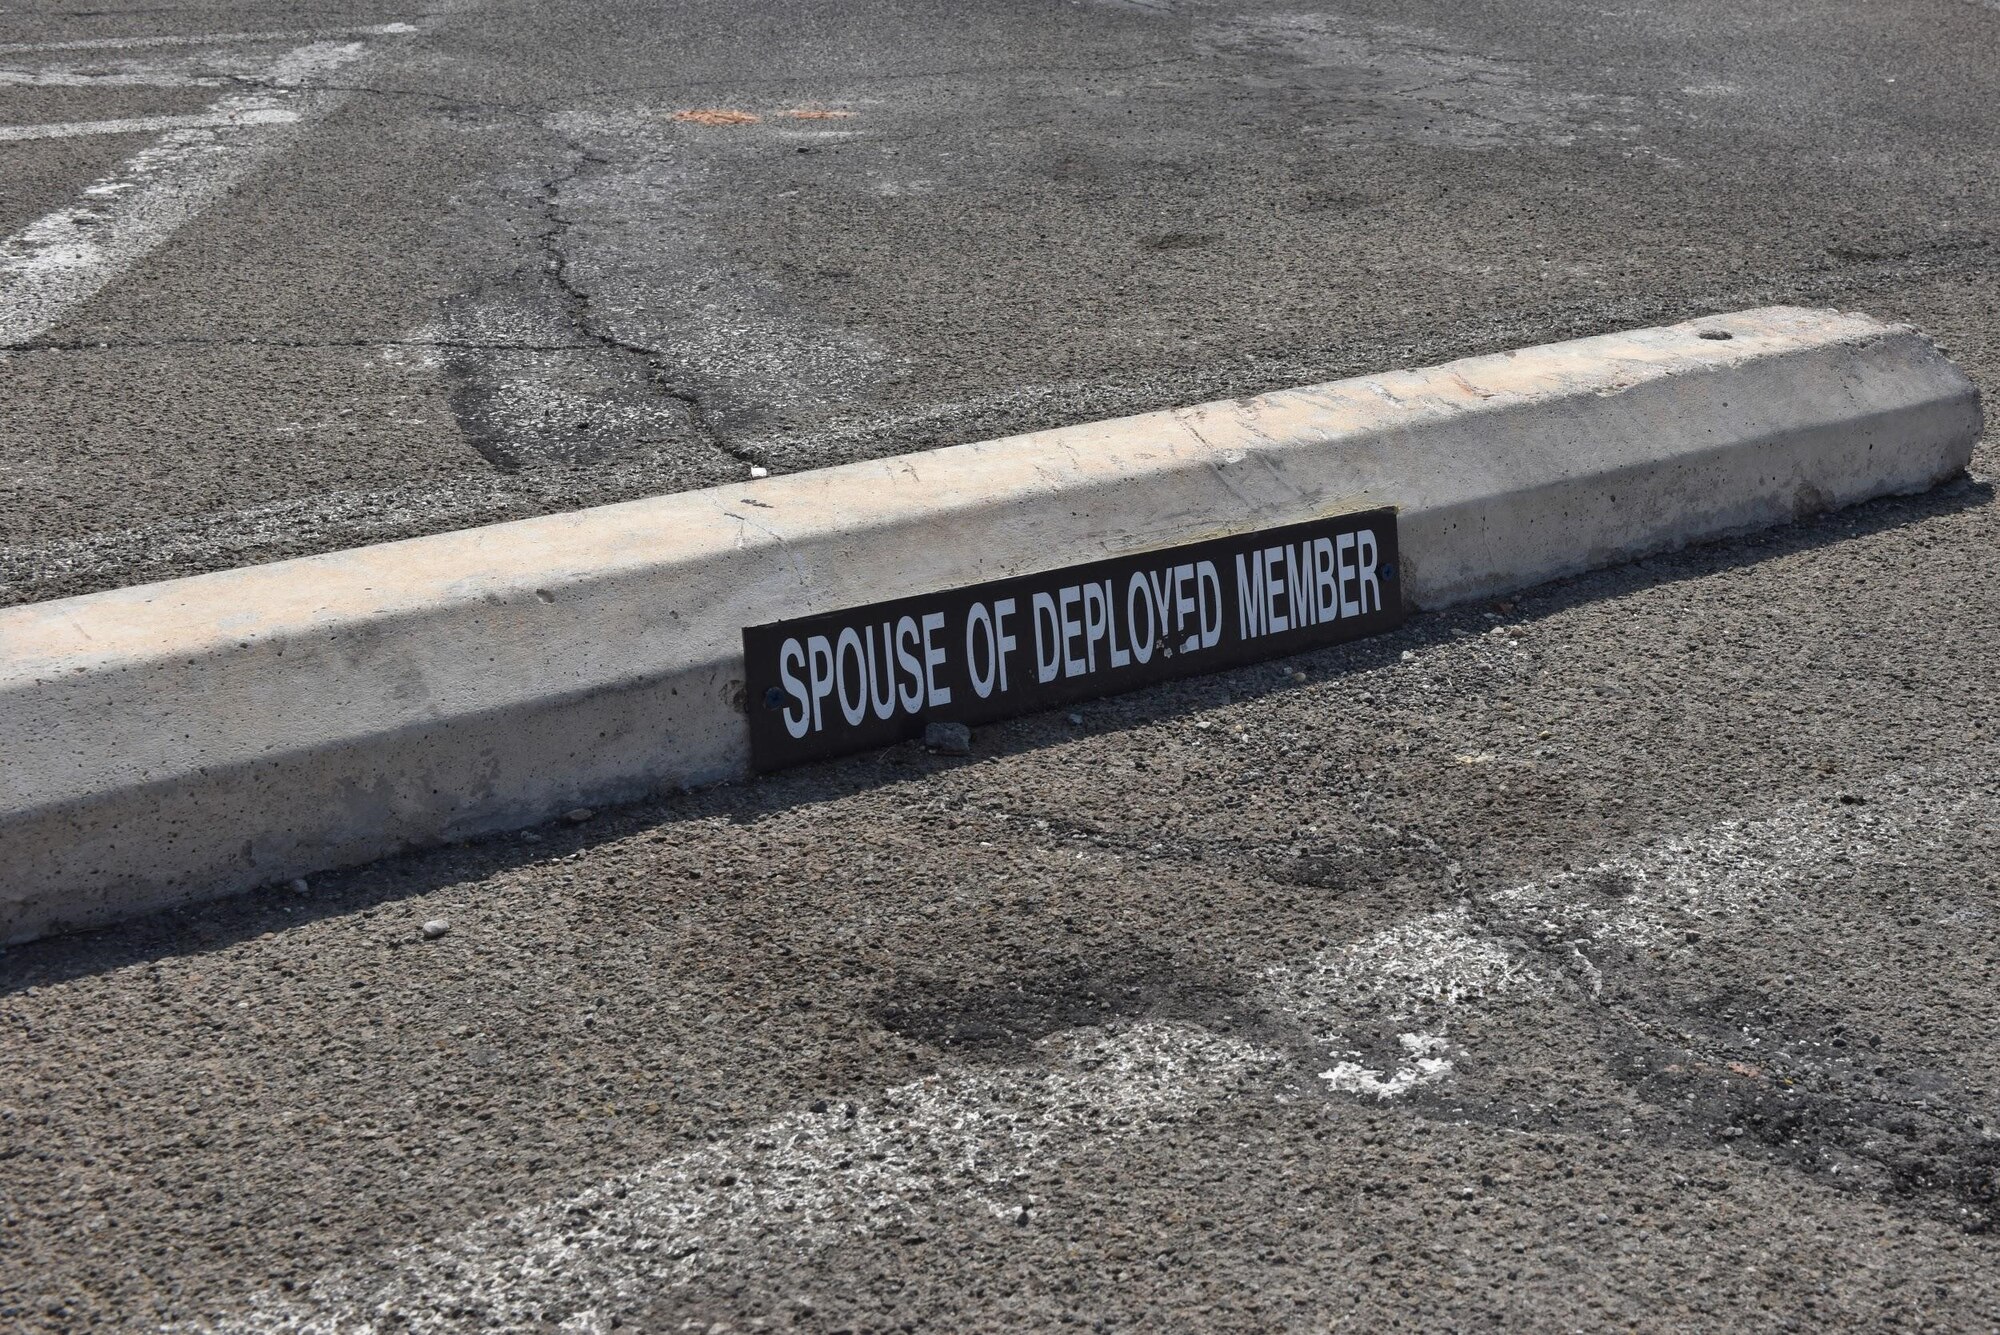 An updated Spouse of Deployed Members’ parking area marks the special parking available to family of deployed service members near the base commissary on Goodfellow Air Force Base, Texas, Sept. 16, 2020. Along with new Maternity parking spaces, the Spouse of Deployed Member parking spots were added to help all members and families across base. (U.S. Air Force photo by Staff Sgt. Seraiah Wolf)